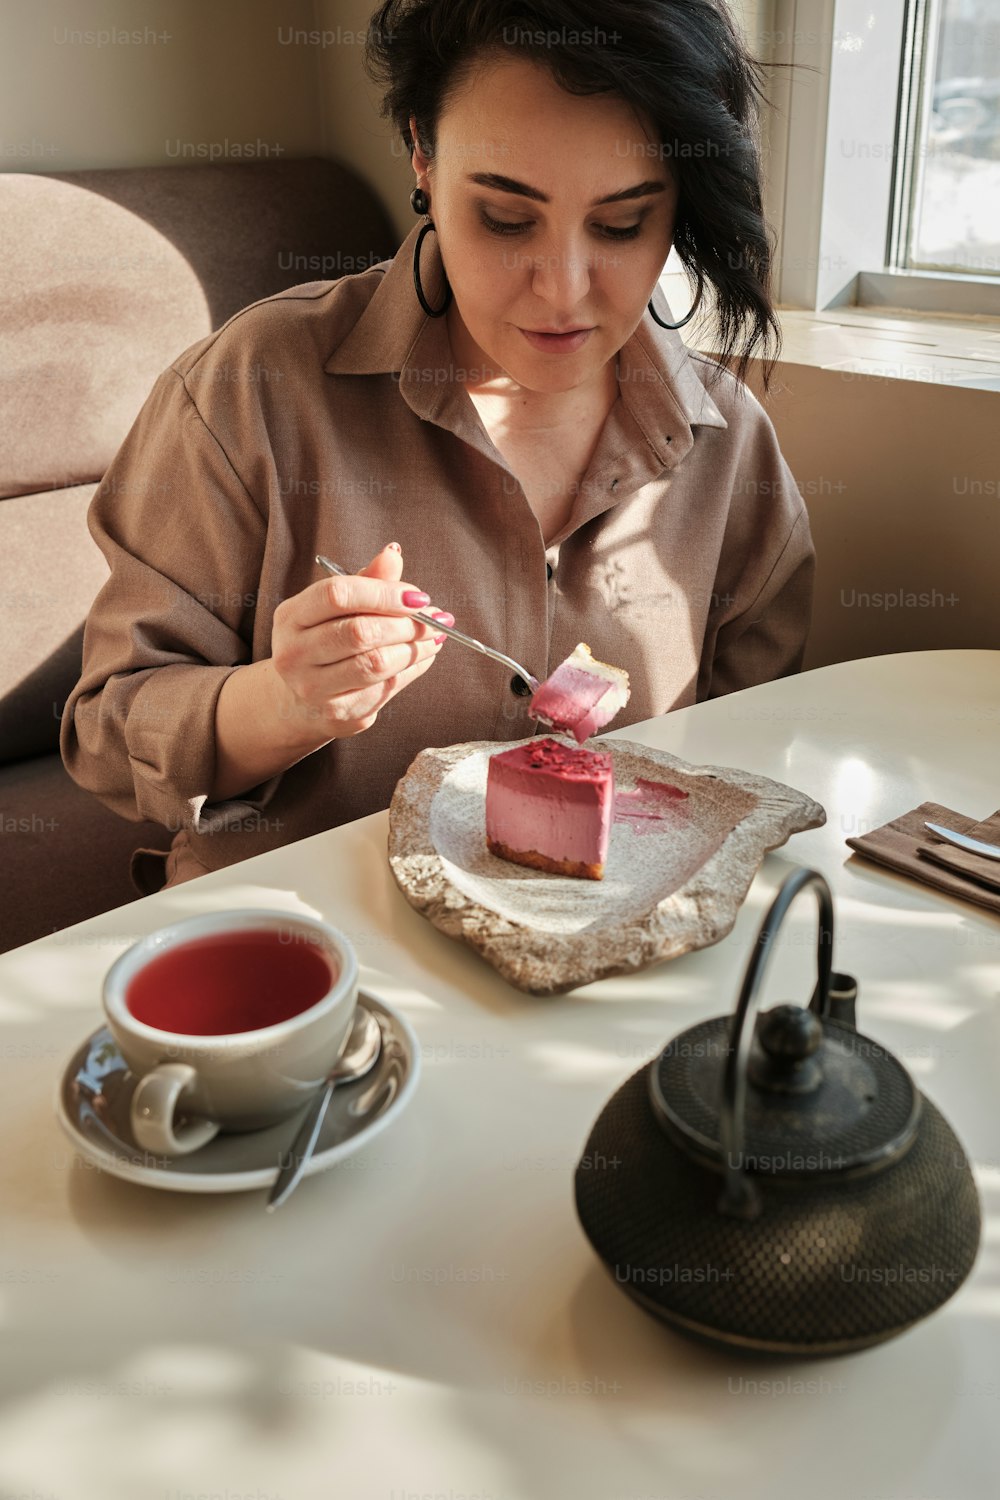 a woman sitting at a table eating a piece of cake